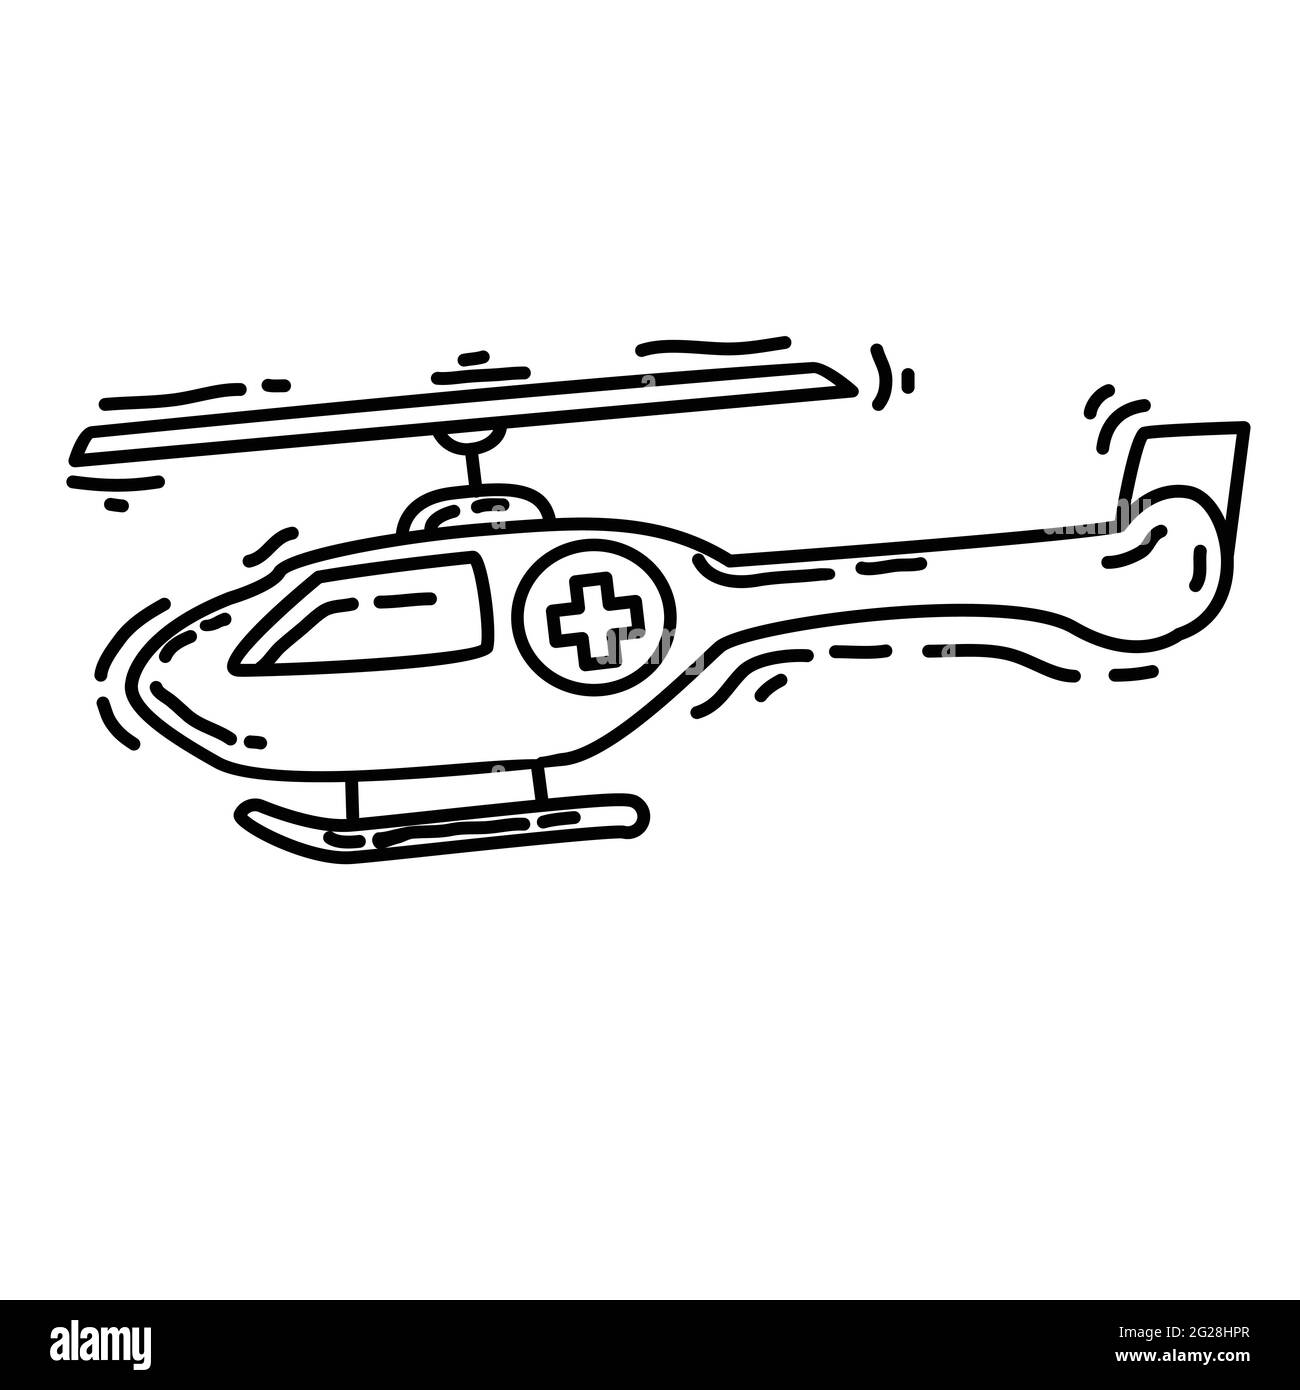 Hiking adventure helicopter ,trip,travel,camping. hand drawn icon design, outline black, doodle icon vector icon Stock Vector